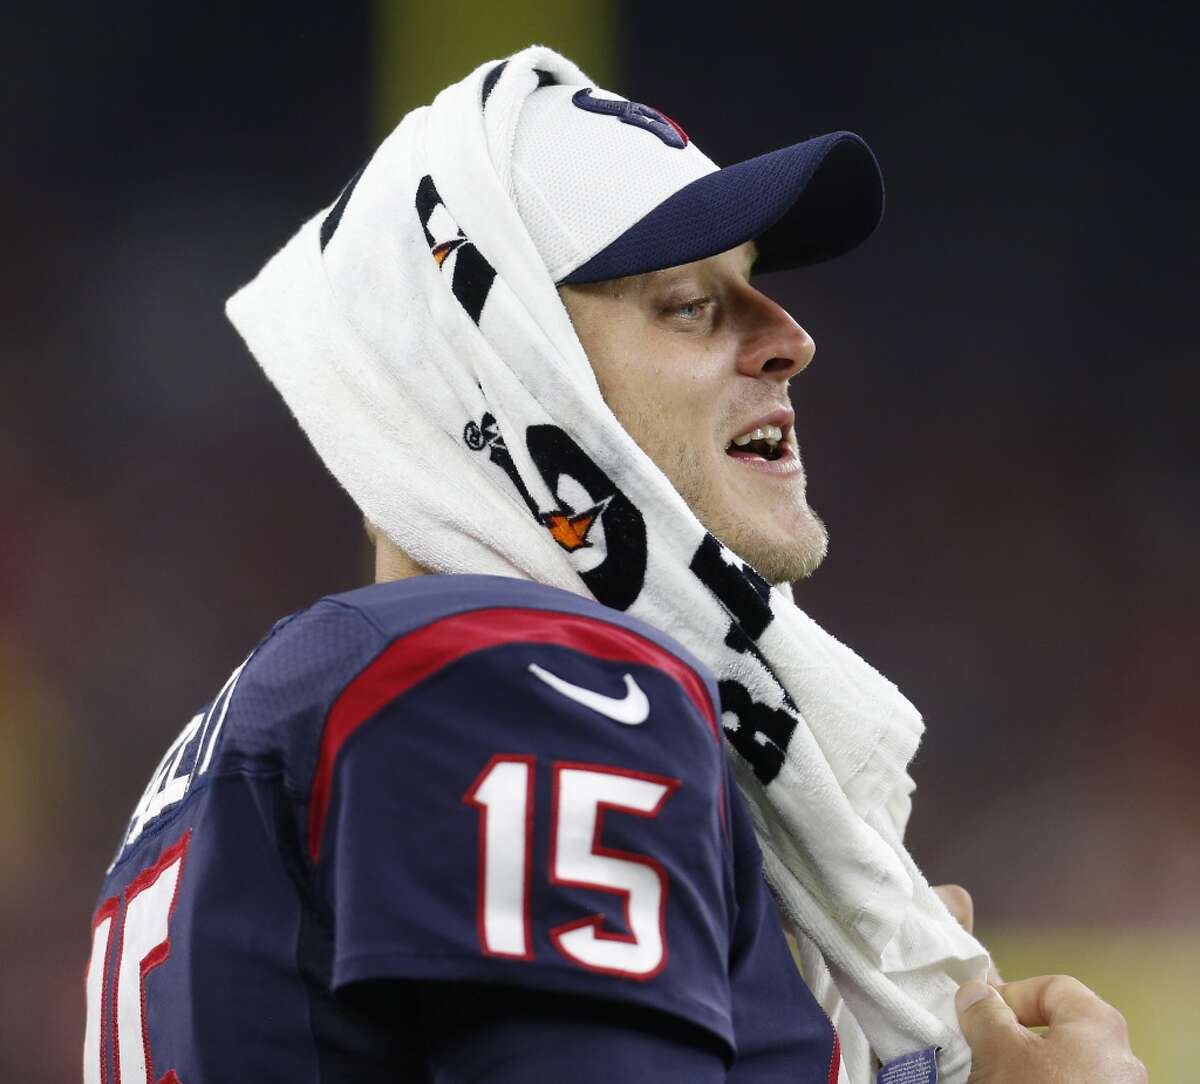 Loser: Ryan Mallett Oversleeping and missing practice when you're trying to win a QB competition is never a good look. Having to explain it to your boss with cameras rolling only adds to the insult. And if Mallett's phone died, why would he want to buy a battery alarm clock, as he told GM Rick Smith? Perhaps one you plug into an outlet would make more sense.